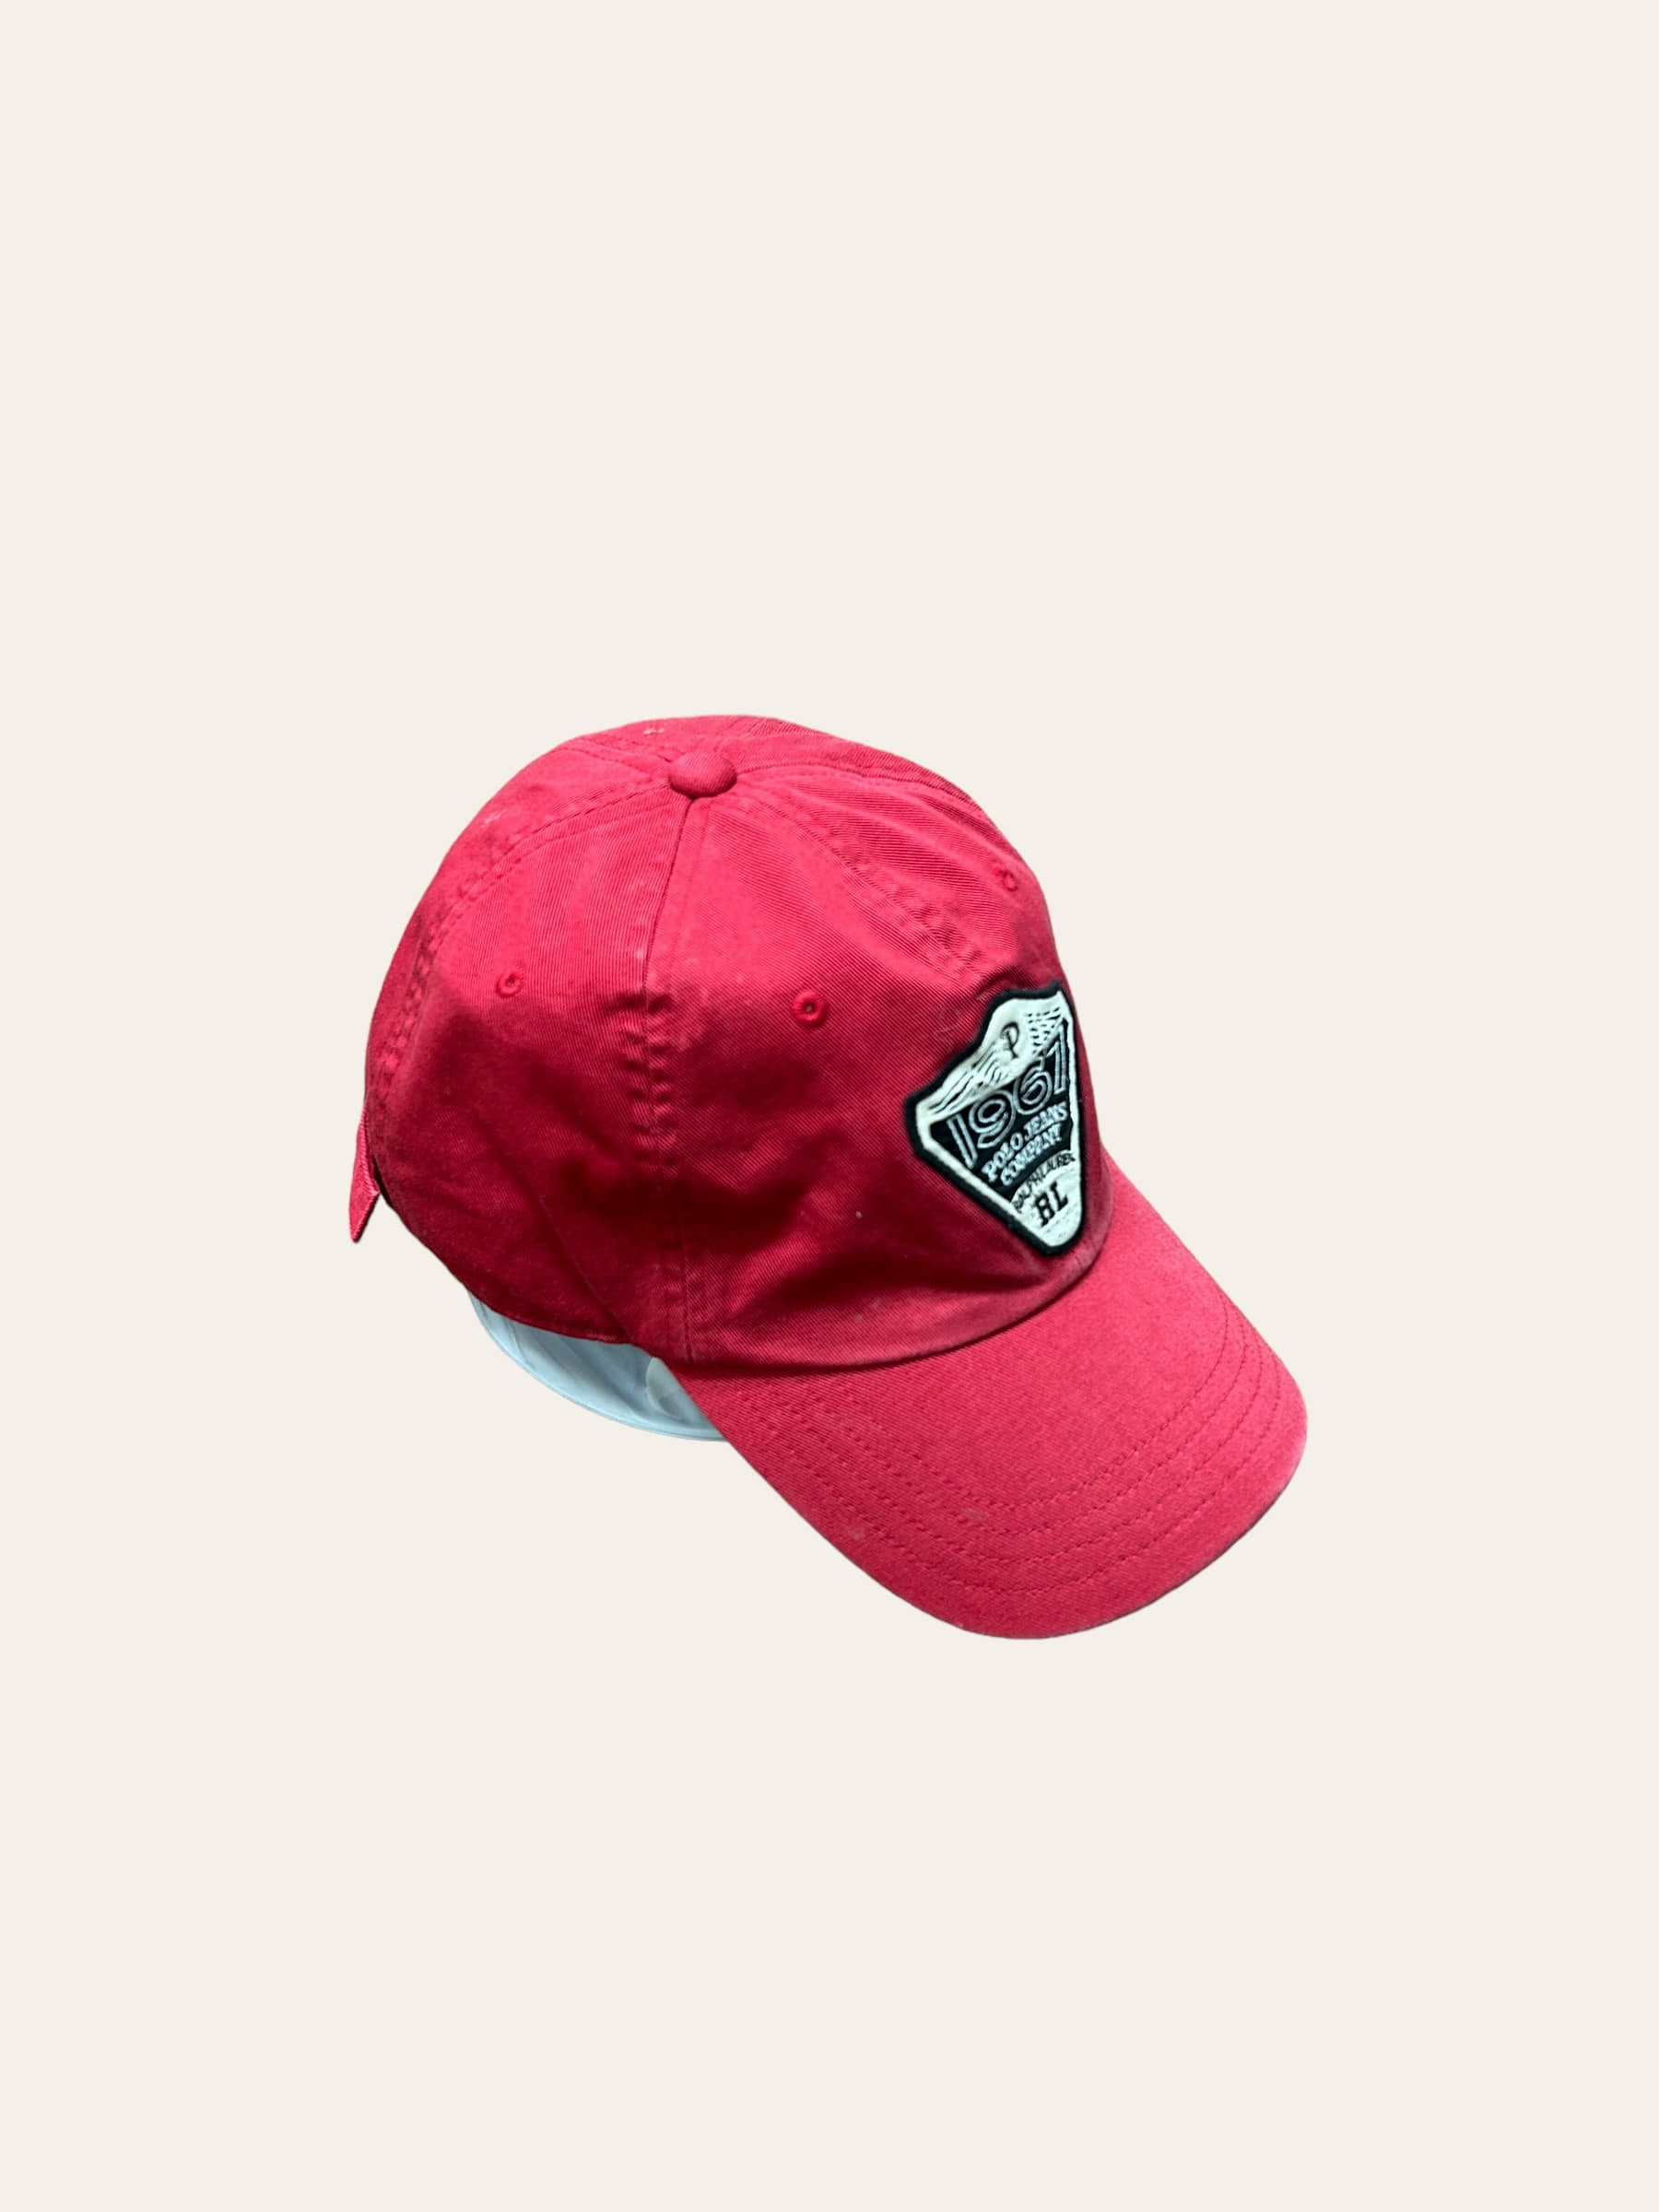 Polo jeans company red patched cap